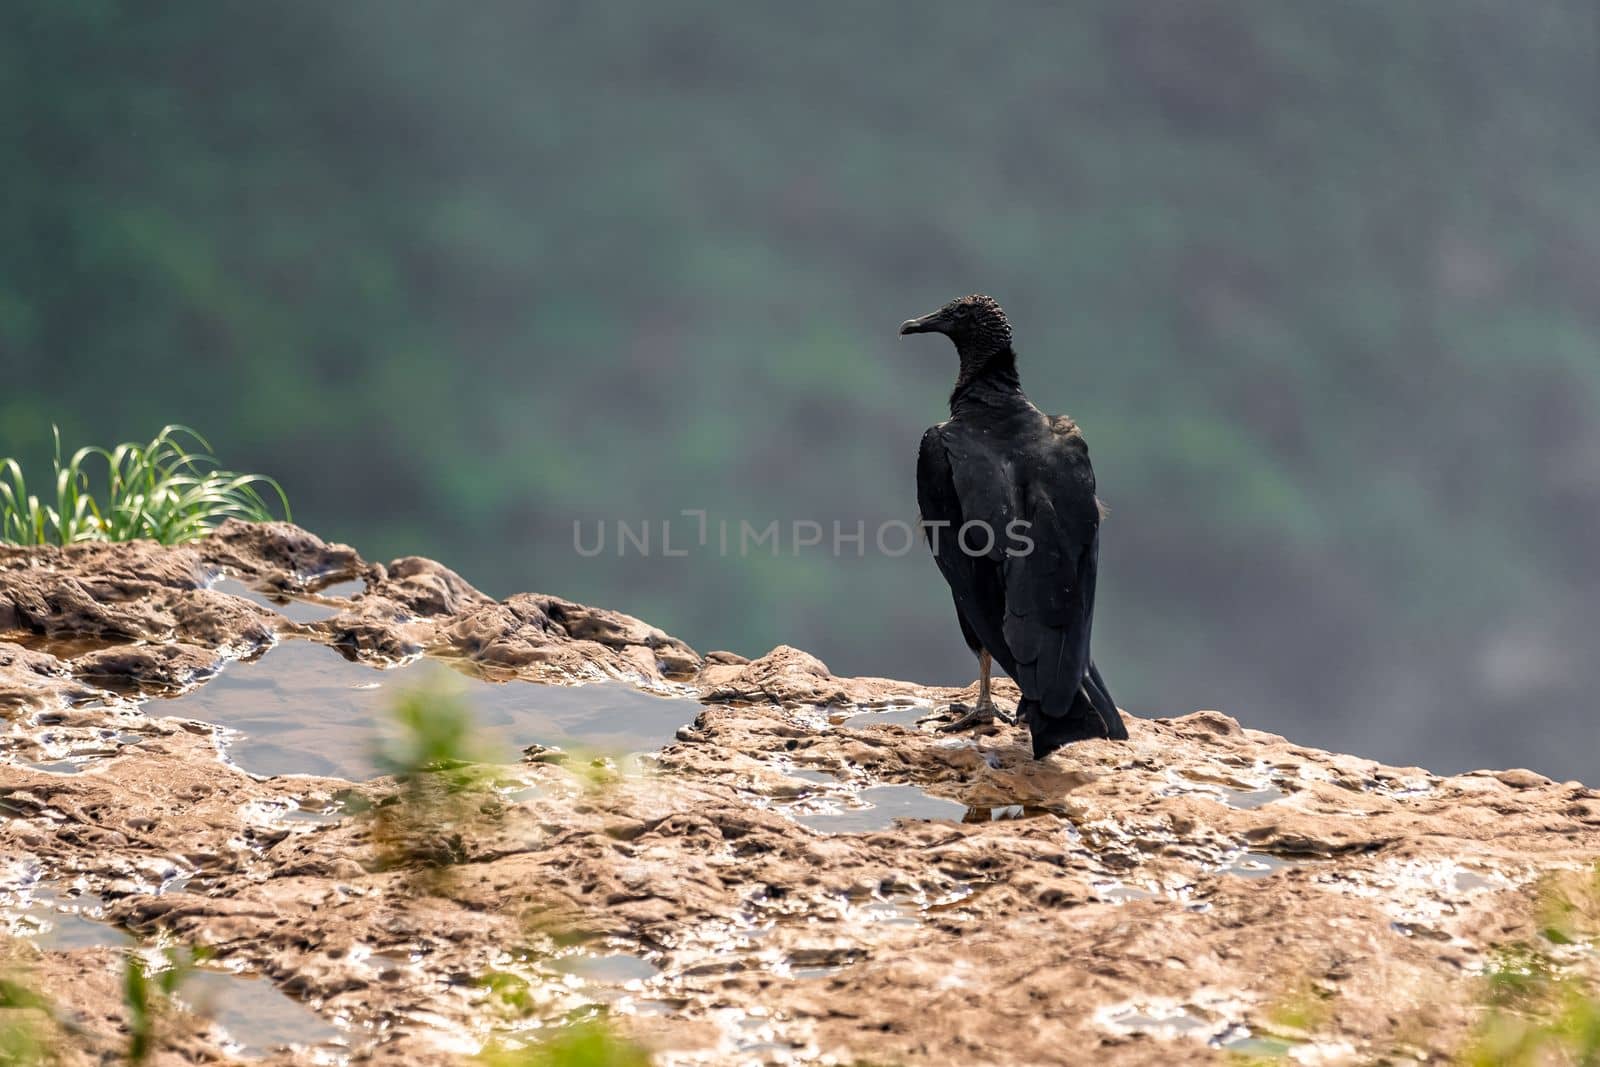 condor sitting on a rock in nature.